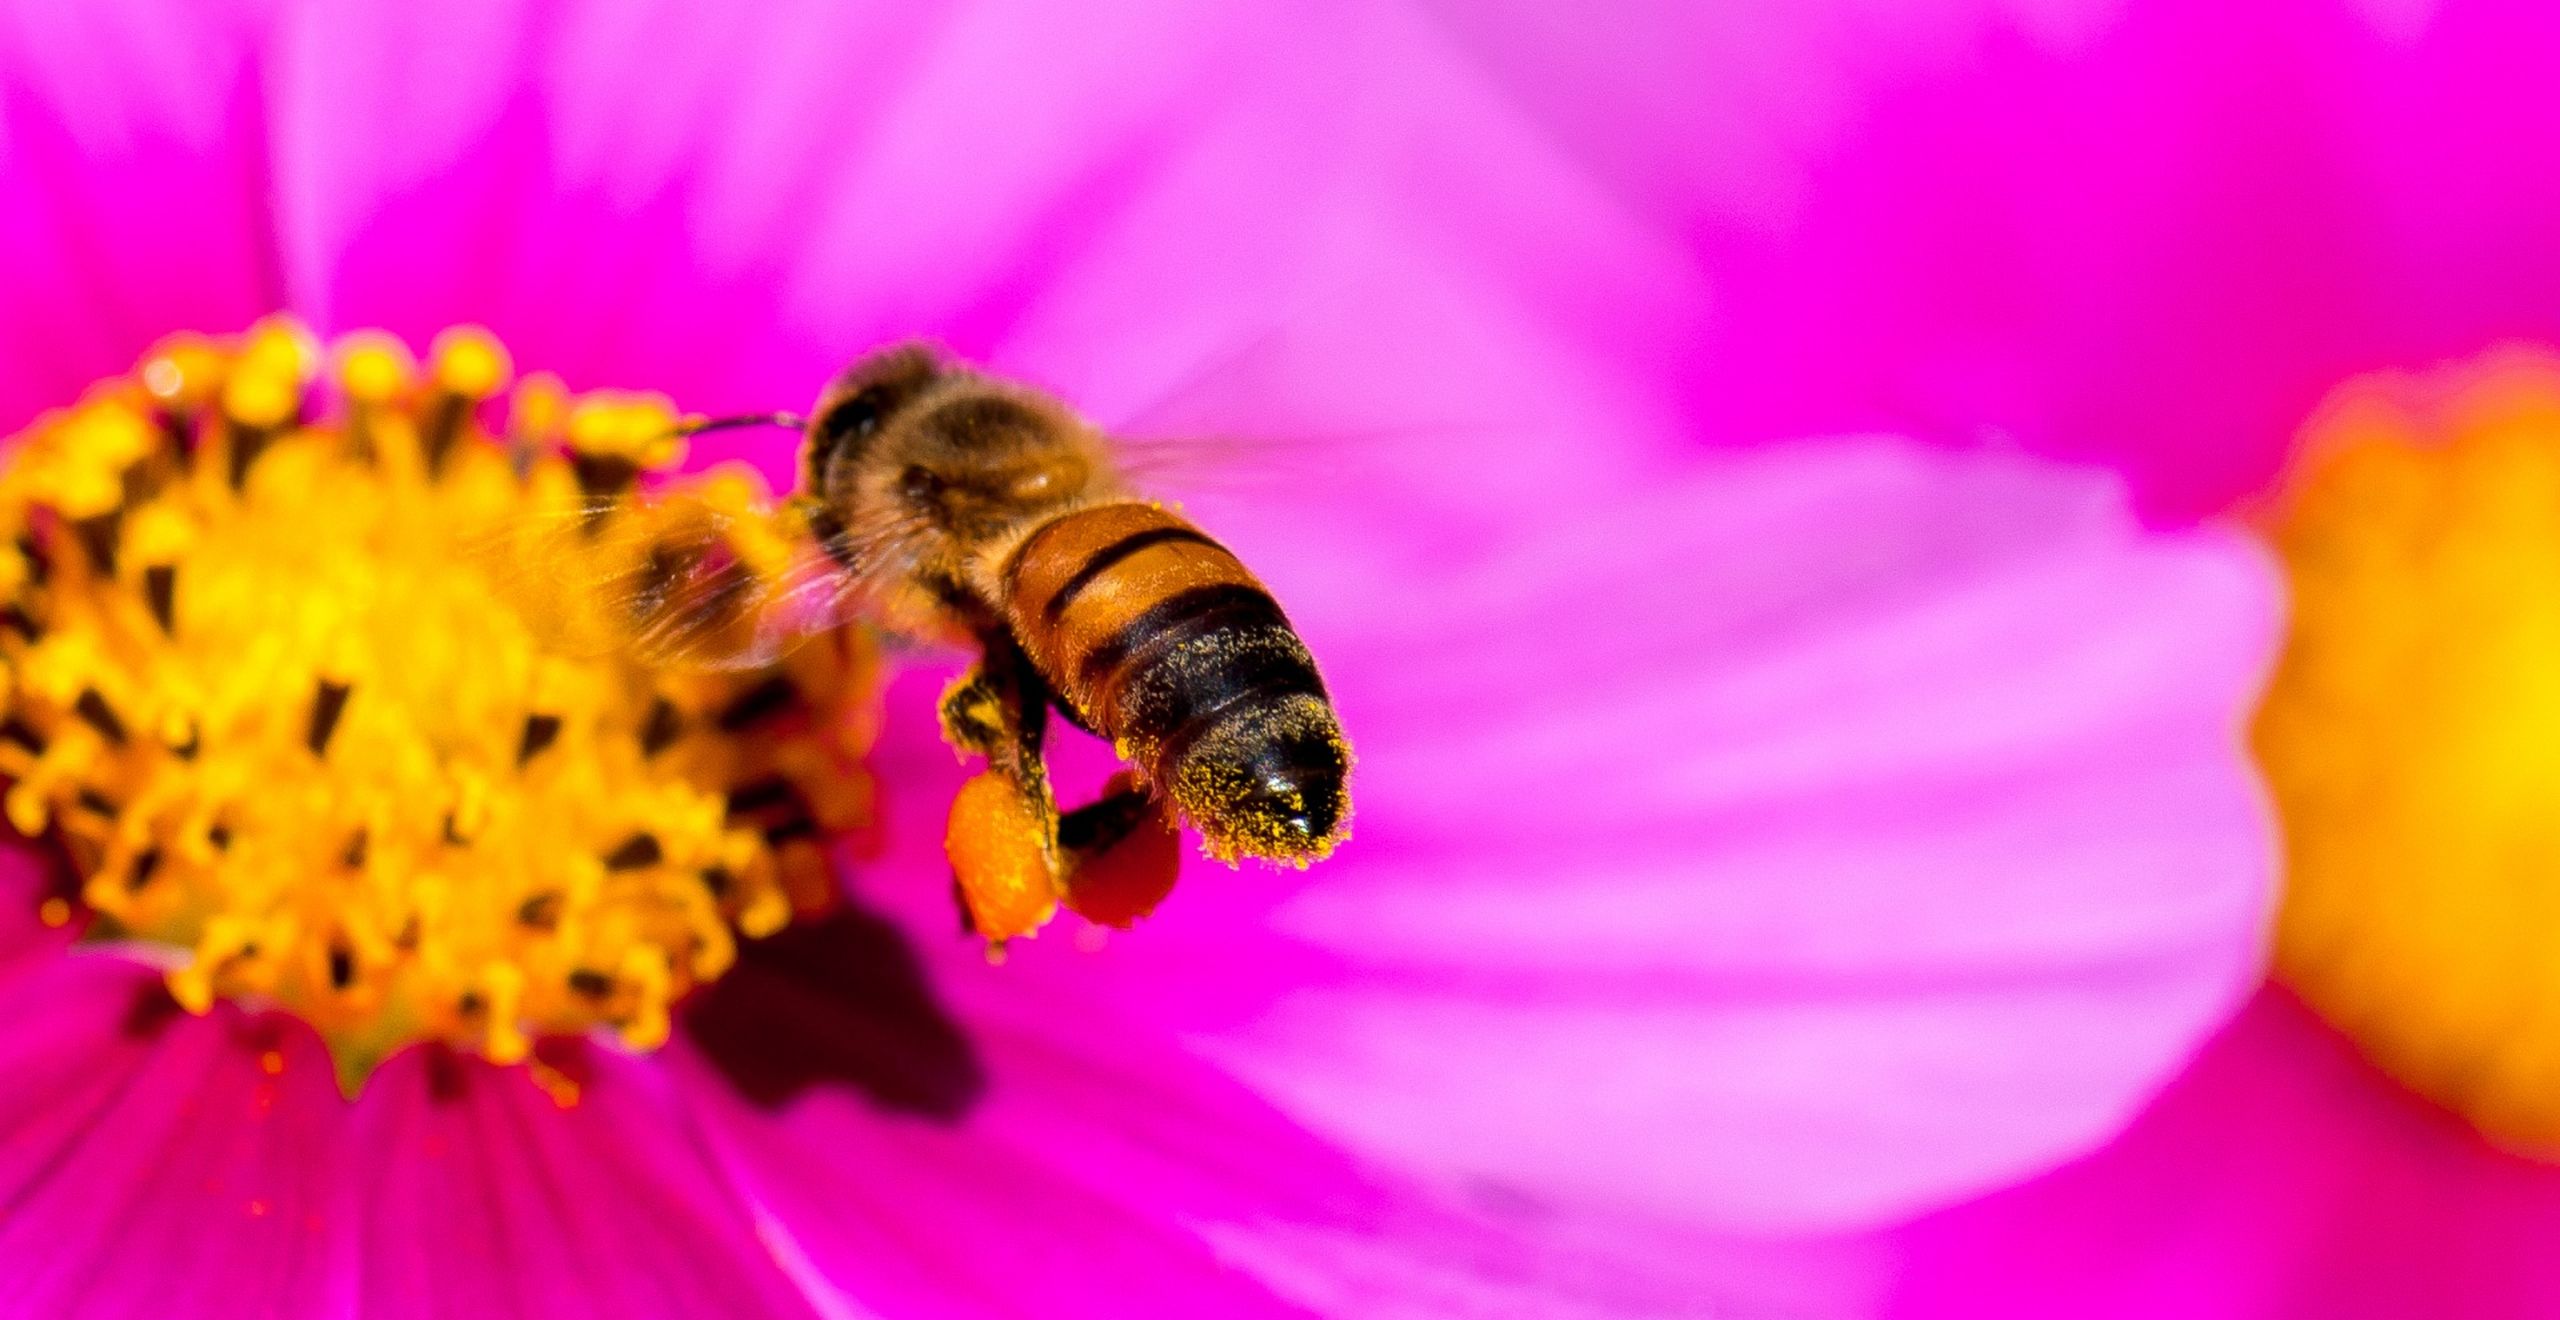 Hard-Working Bee Wallpaper - Insects Wallpapers and Backgrounds